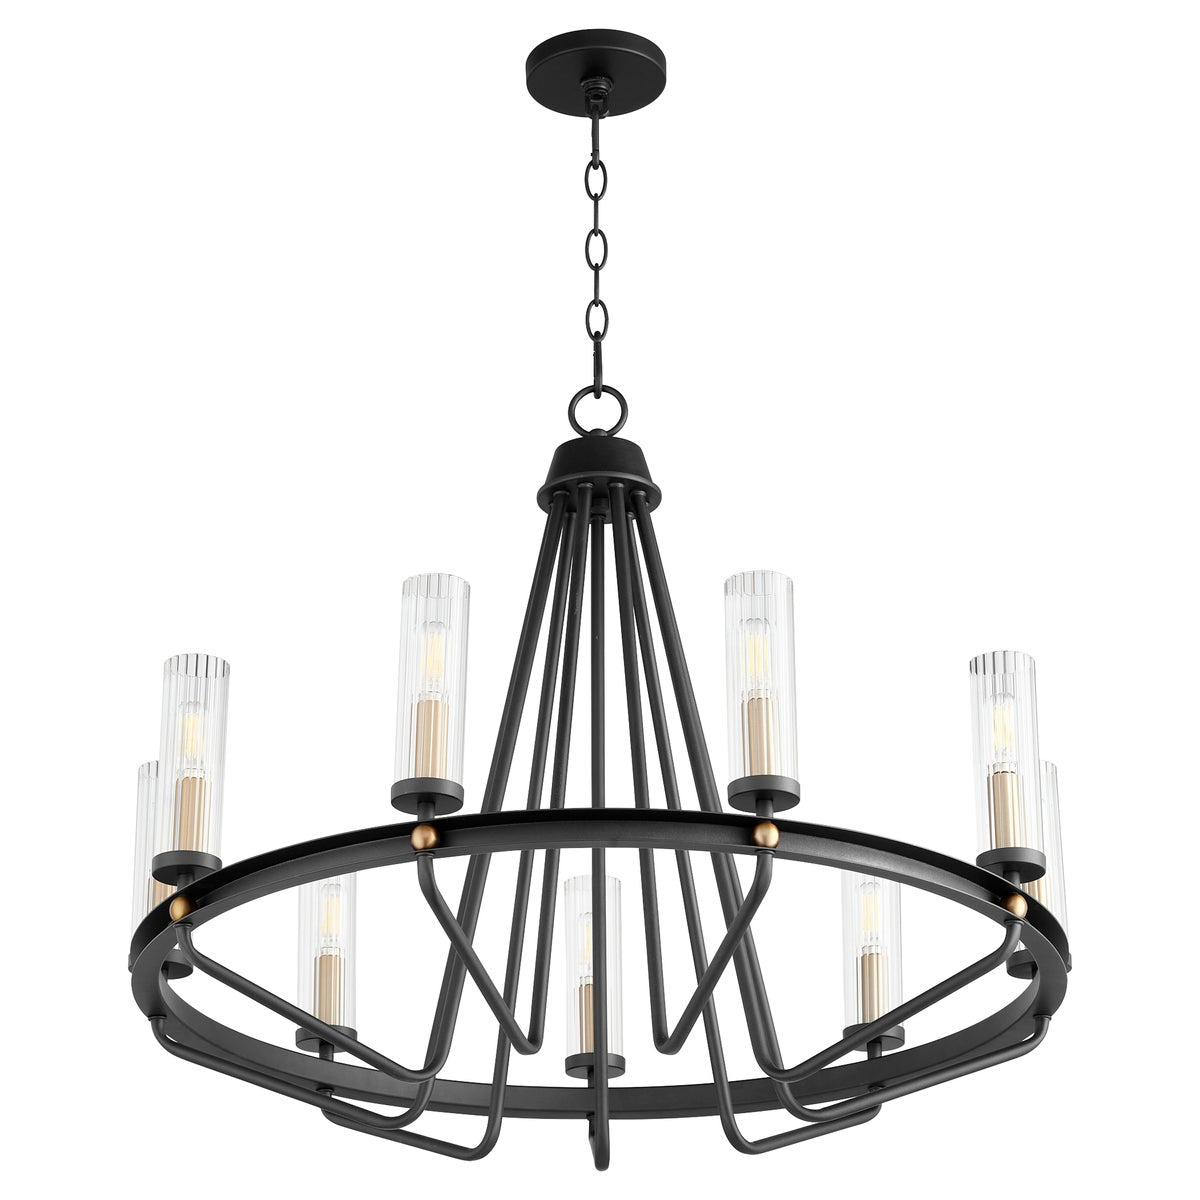 A black chandelier with clear glass bulbs, exuding interior extravagance. Enhance any space with this modern ring chandelier&#39;s radiant lighting quality. Quorum International&#39;s Ring Chandelier, 30&quot;W x 25&quot;H, 9 bulbs, dimmable, UL Listed.